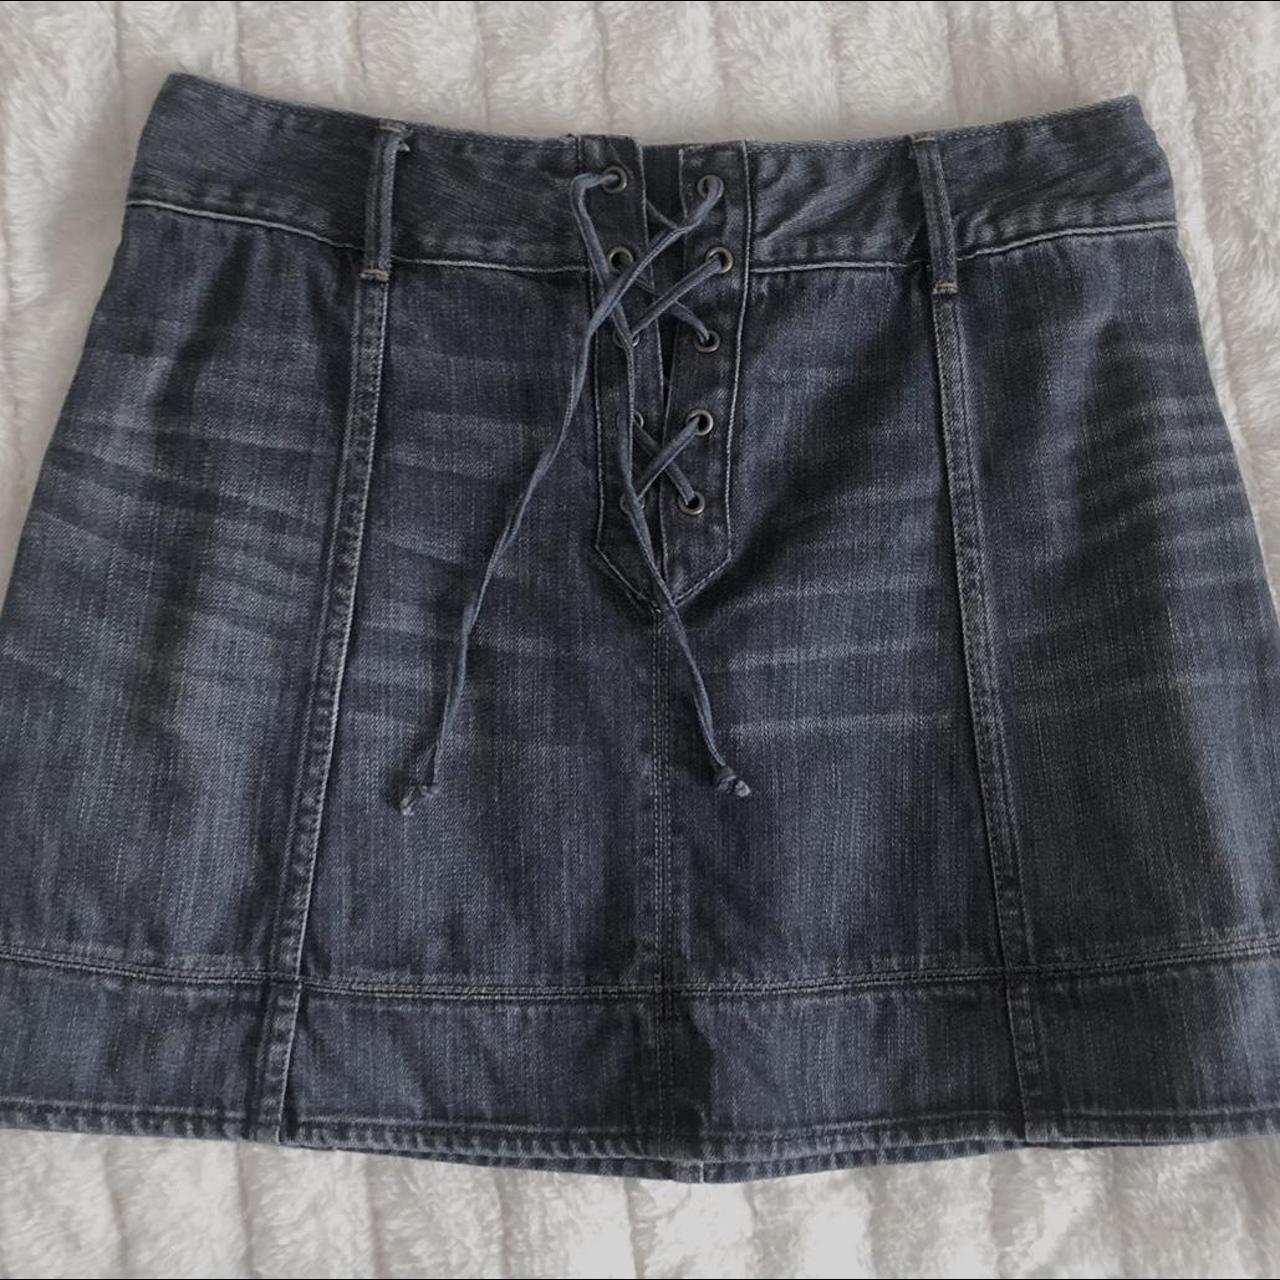 Abercrombie & Fitch Women's Navy and Blue Skirt